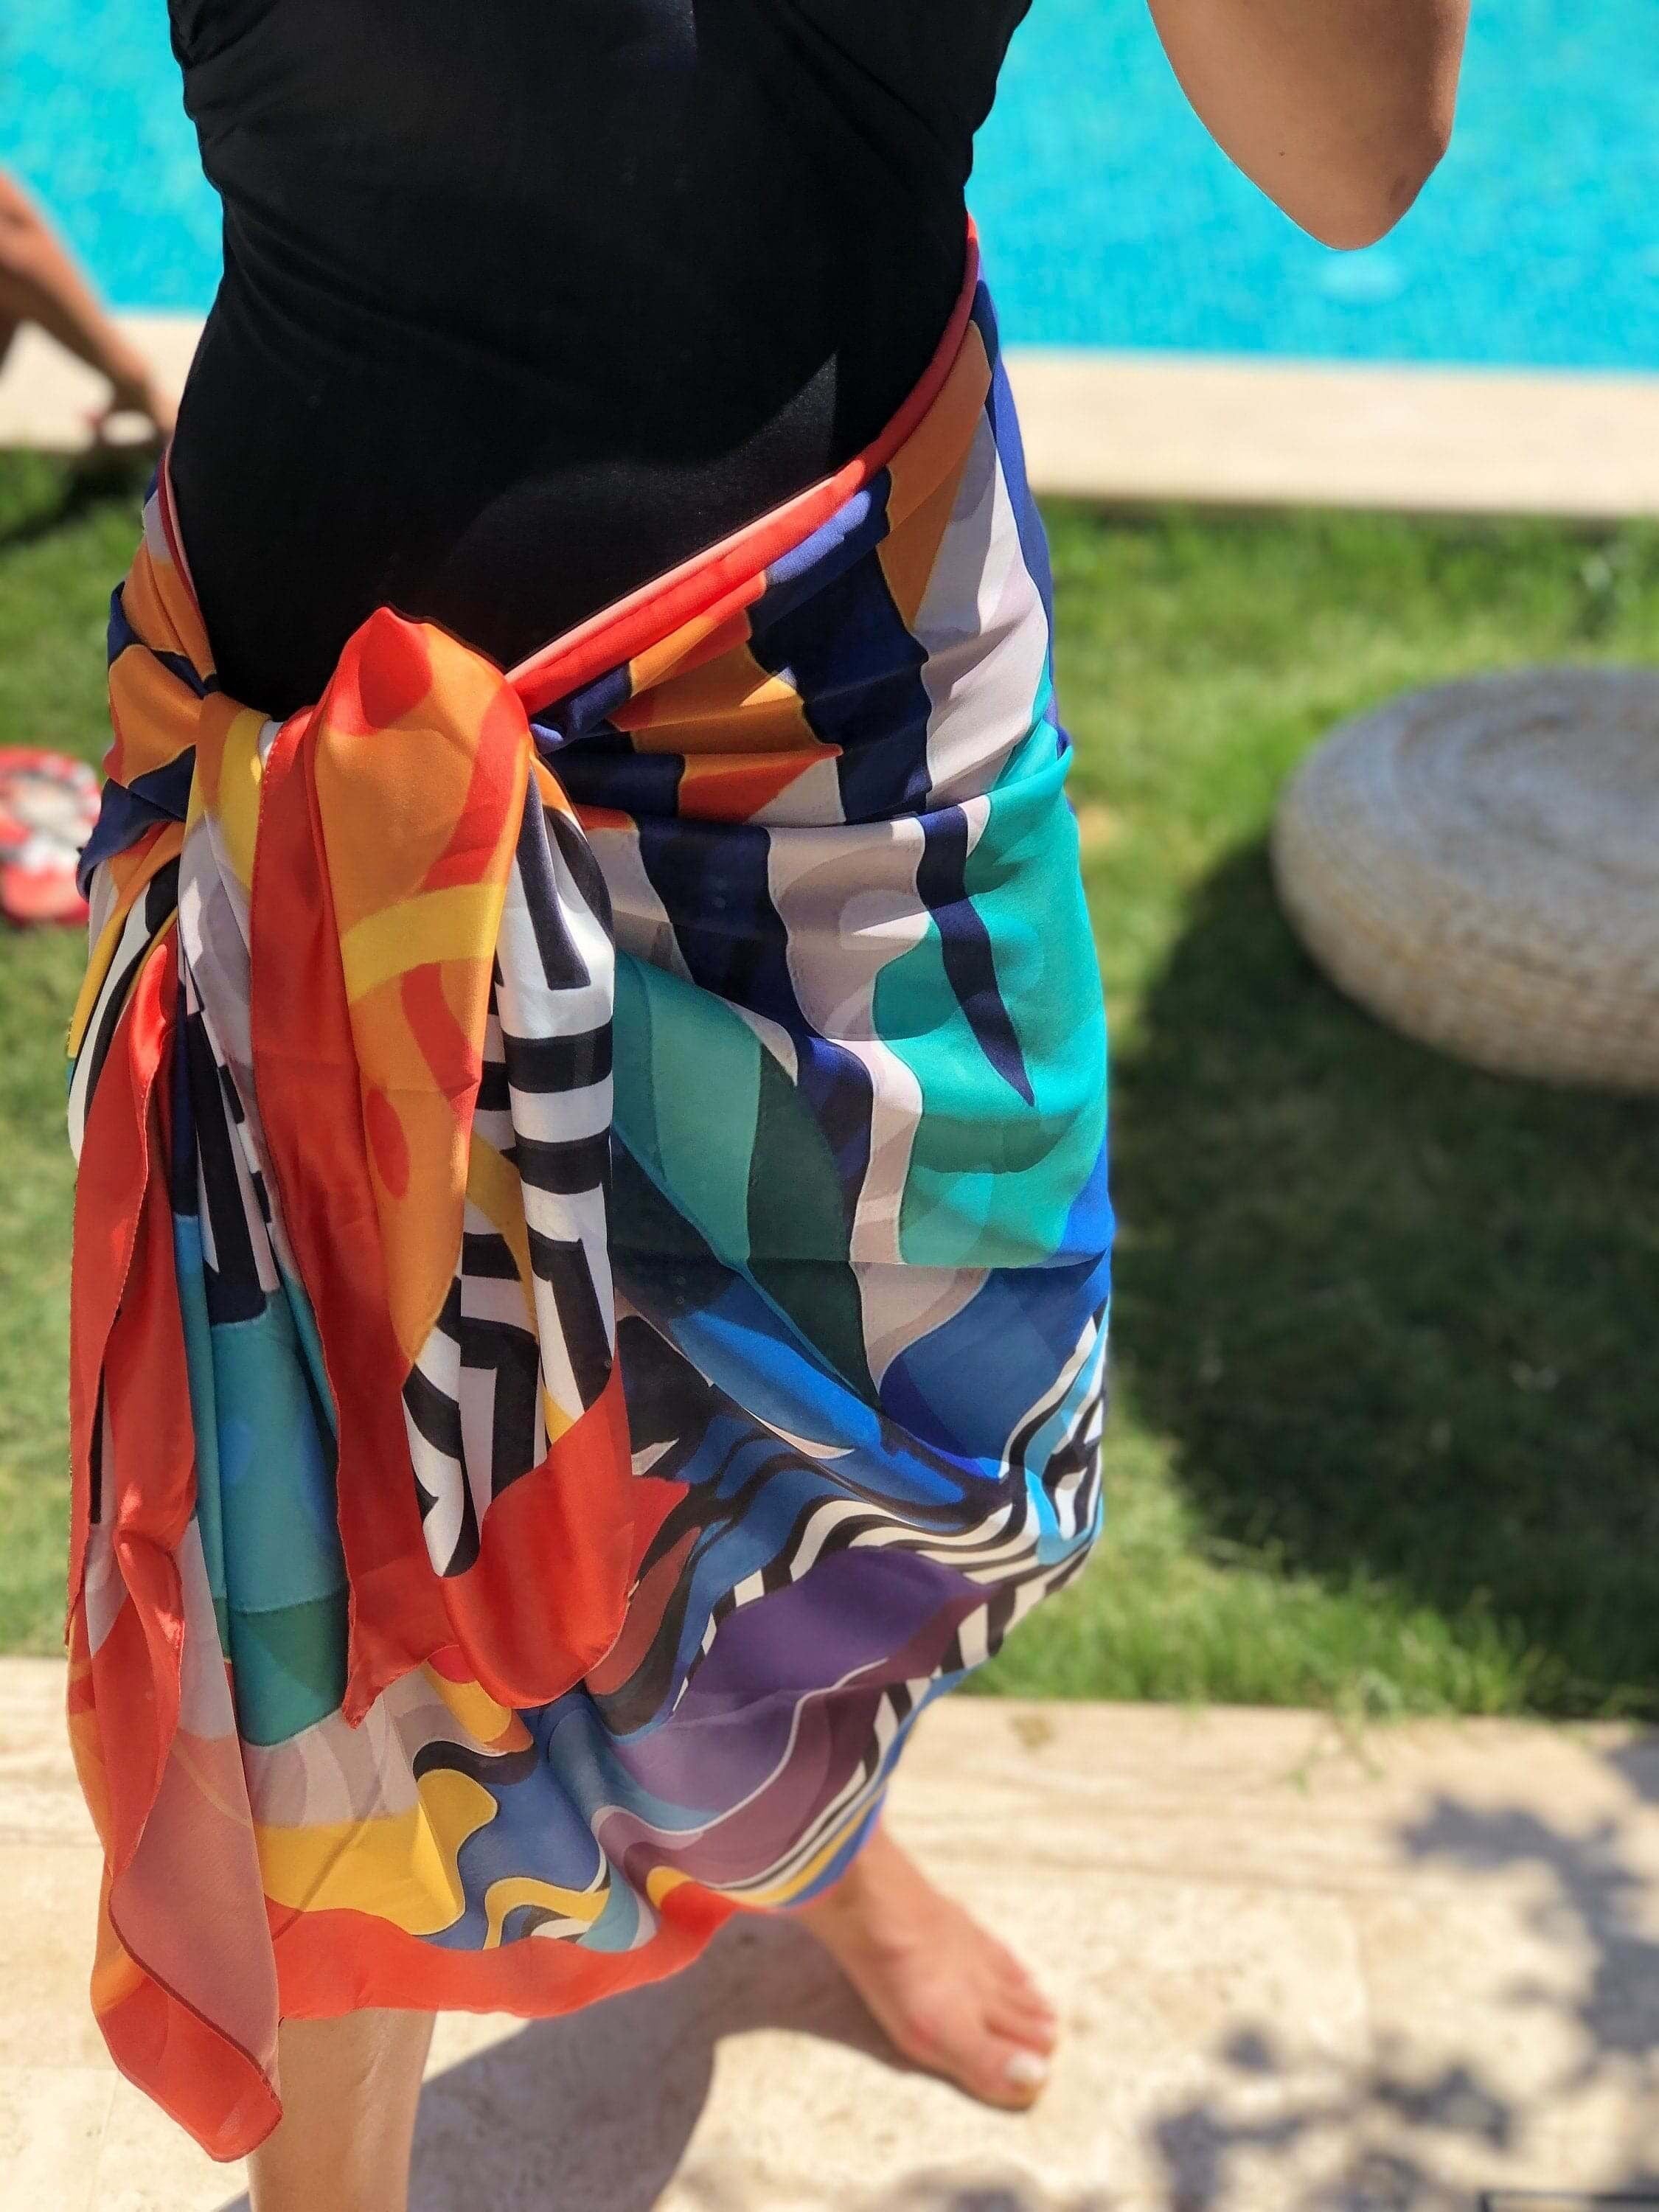 Long Scarf, All Season Scarf, Colorful Scarf, Cover Up Scarf, Cotton Beach Wrap, Colorful Pattern Green Orange Blue Scarf